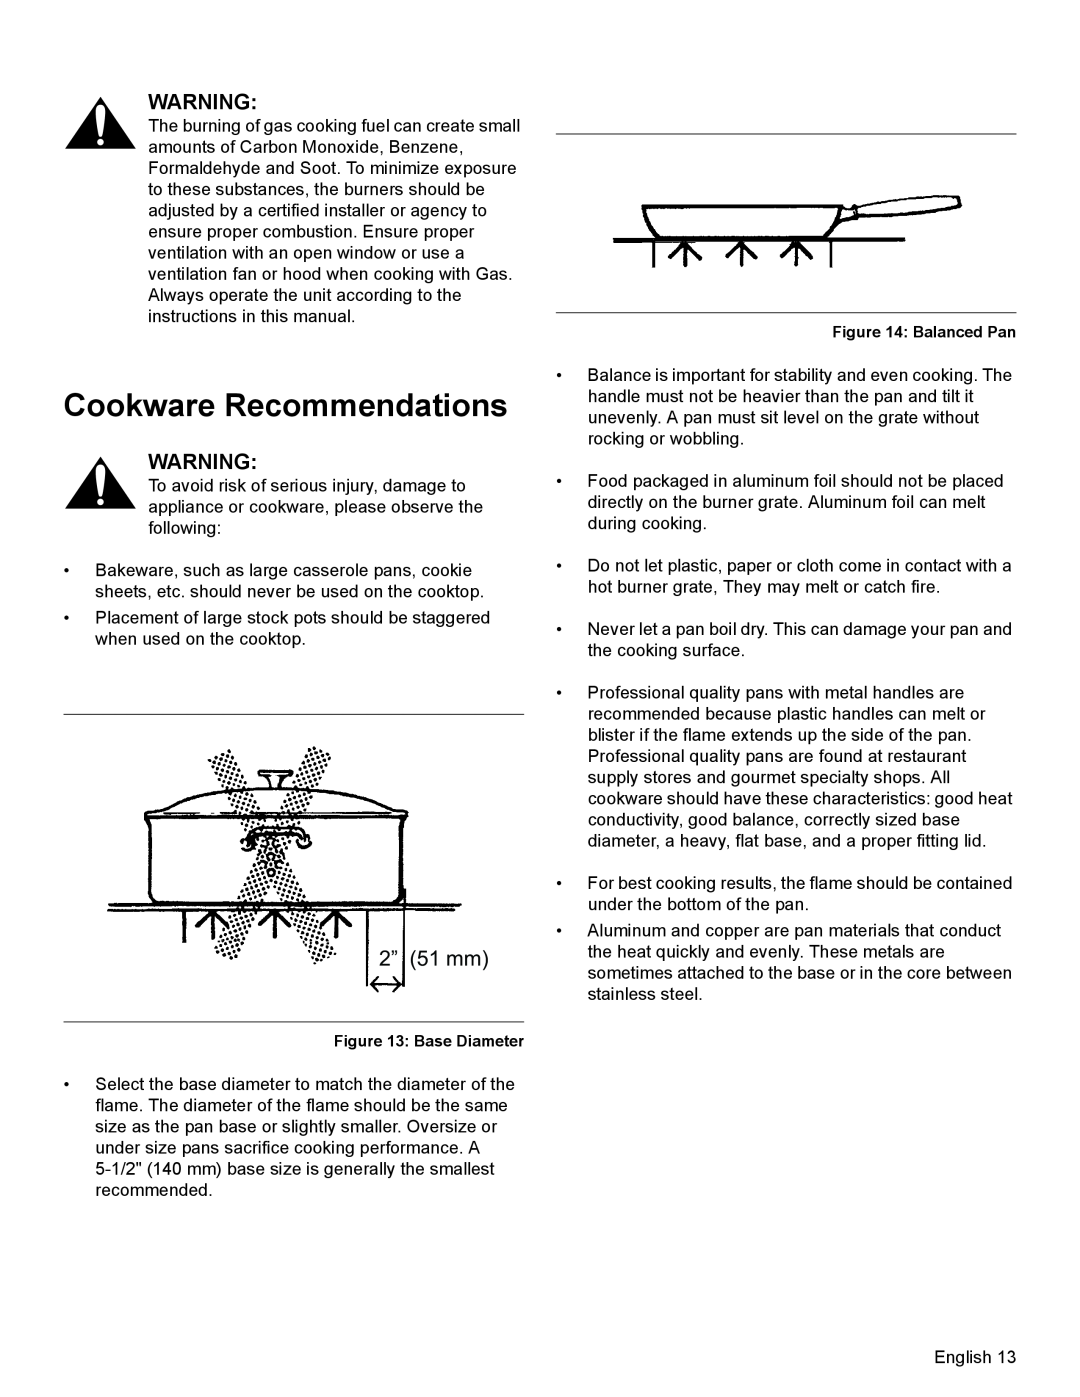 Thermador PRL36, PRG30, PRL30 manual Cookware Recommendations, 2” 51 mm 